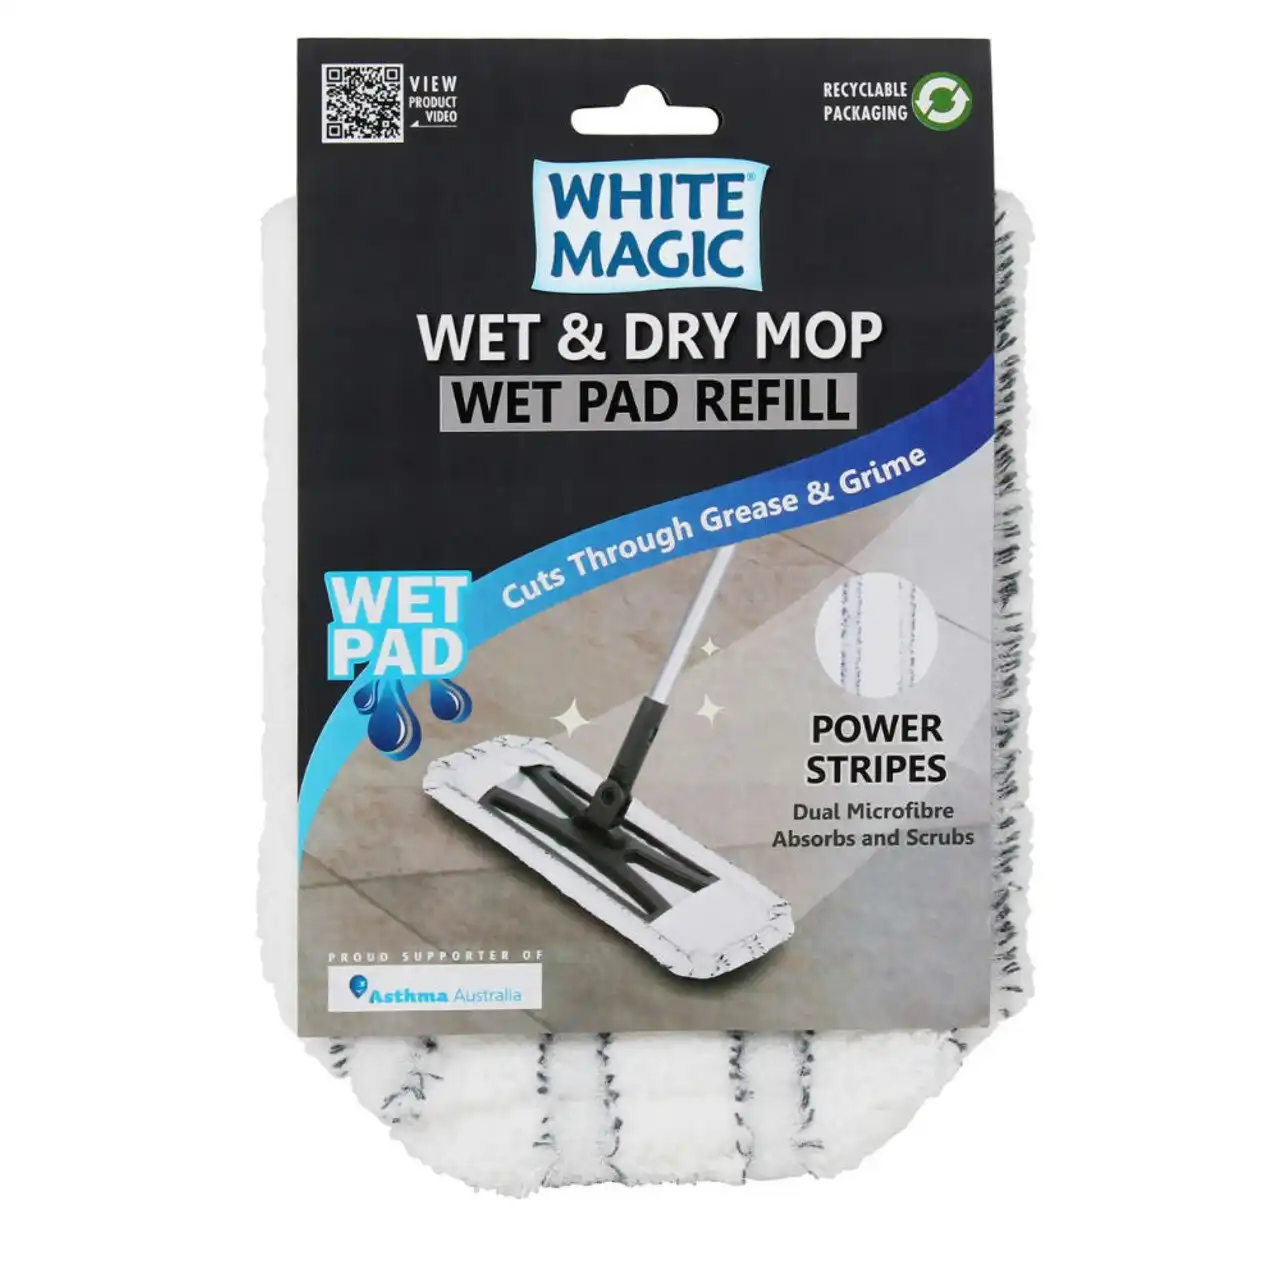 White Magic 40cm Microfibre Pad Refill Replacement For Wet & Dry Mop Dry White